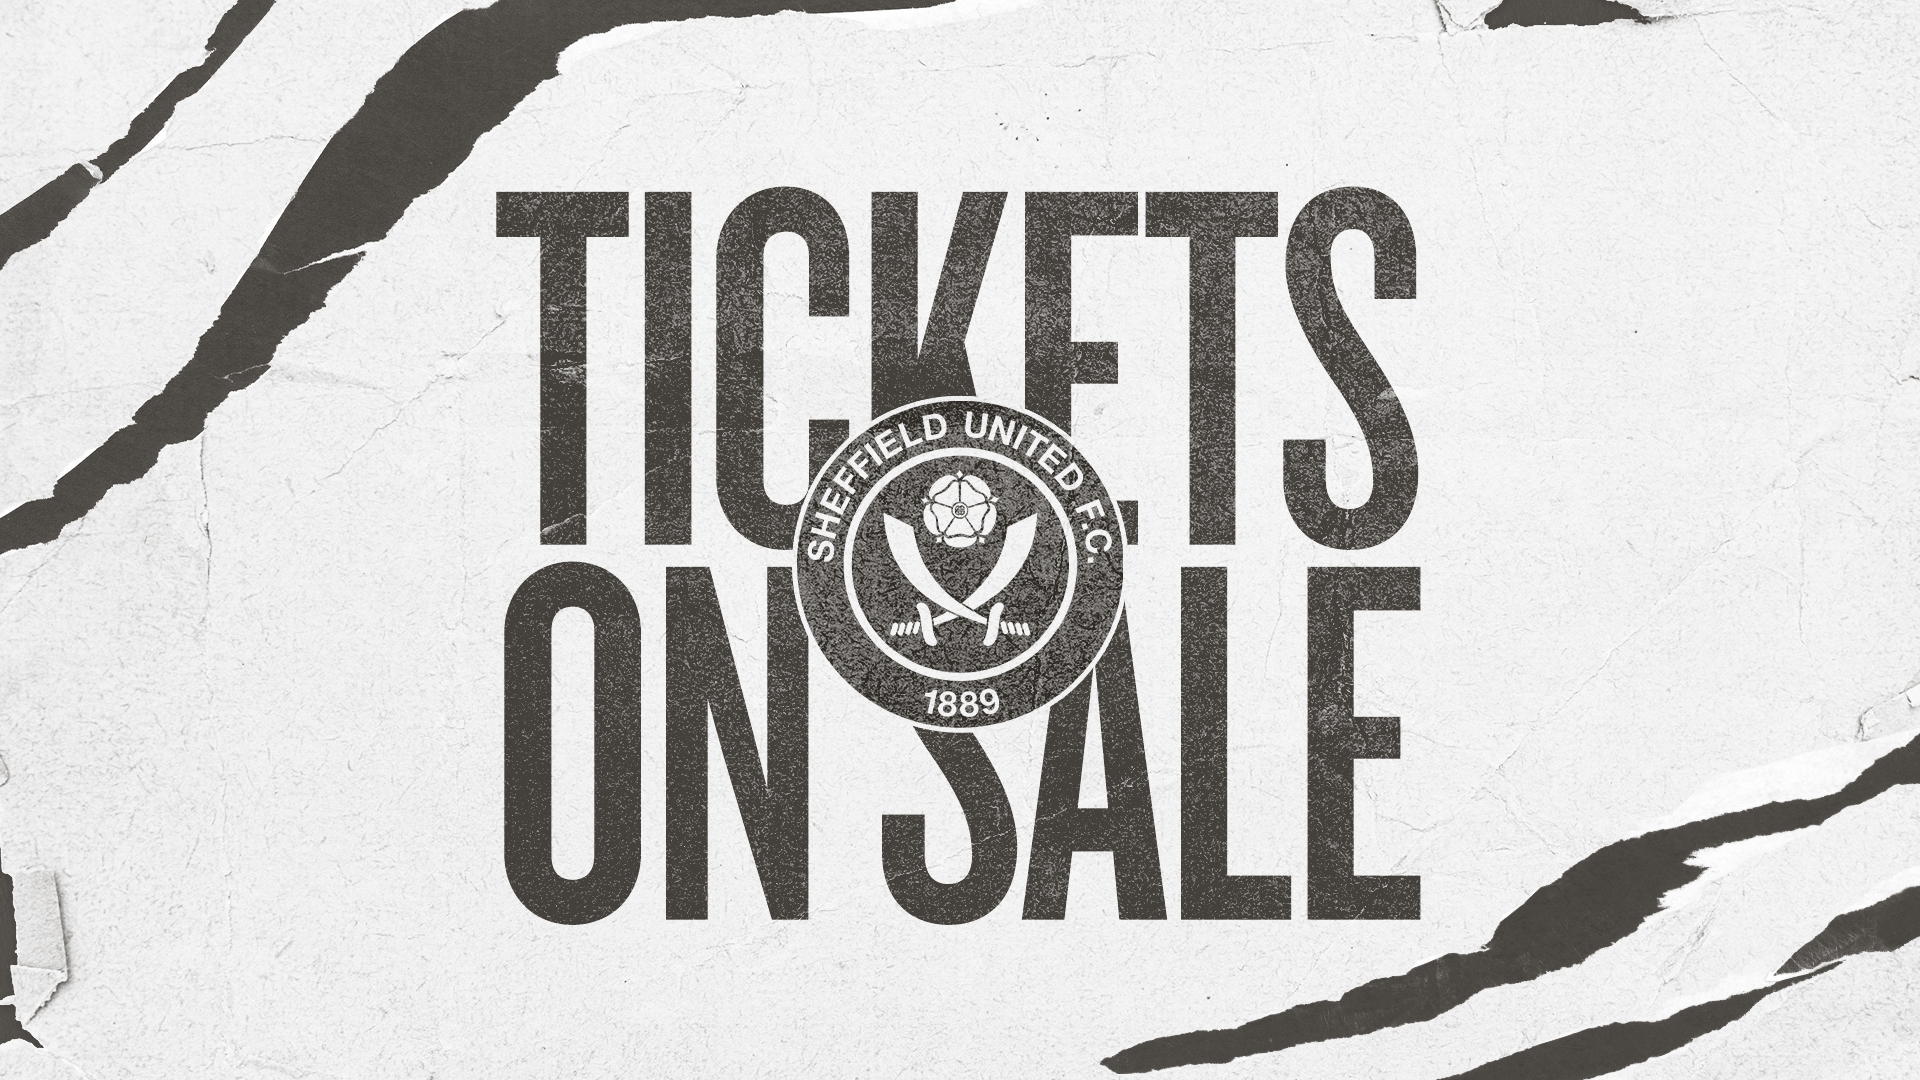 Sheffield United tickets on sale